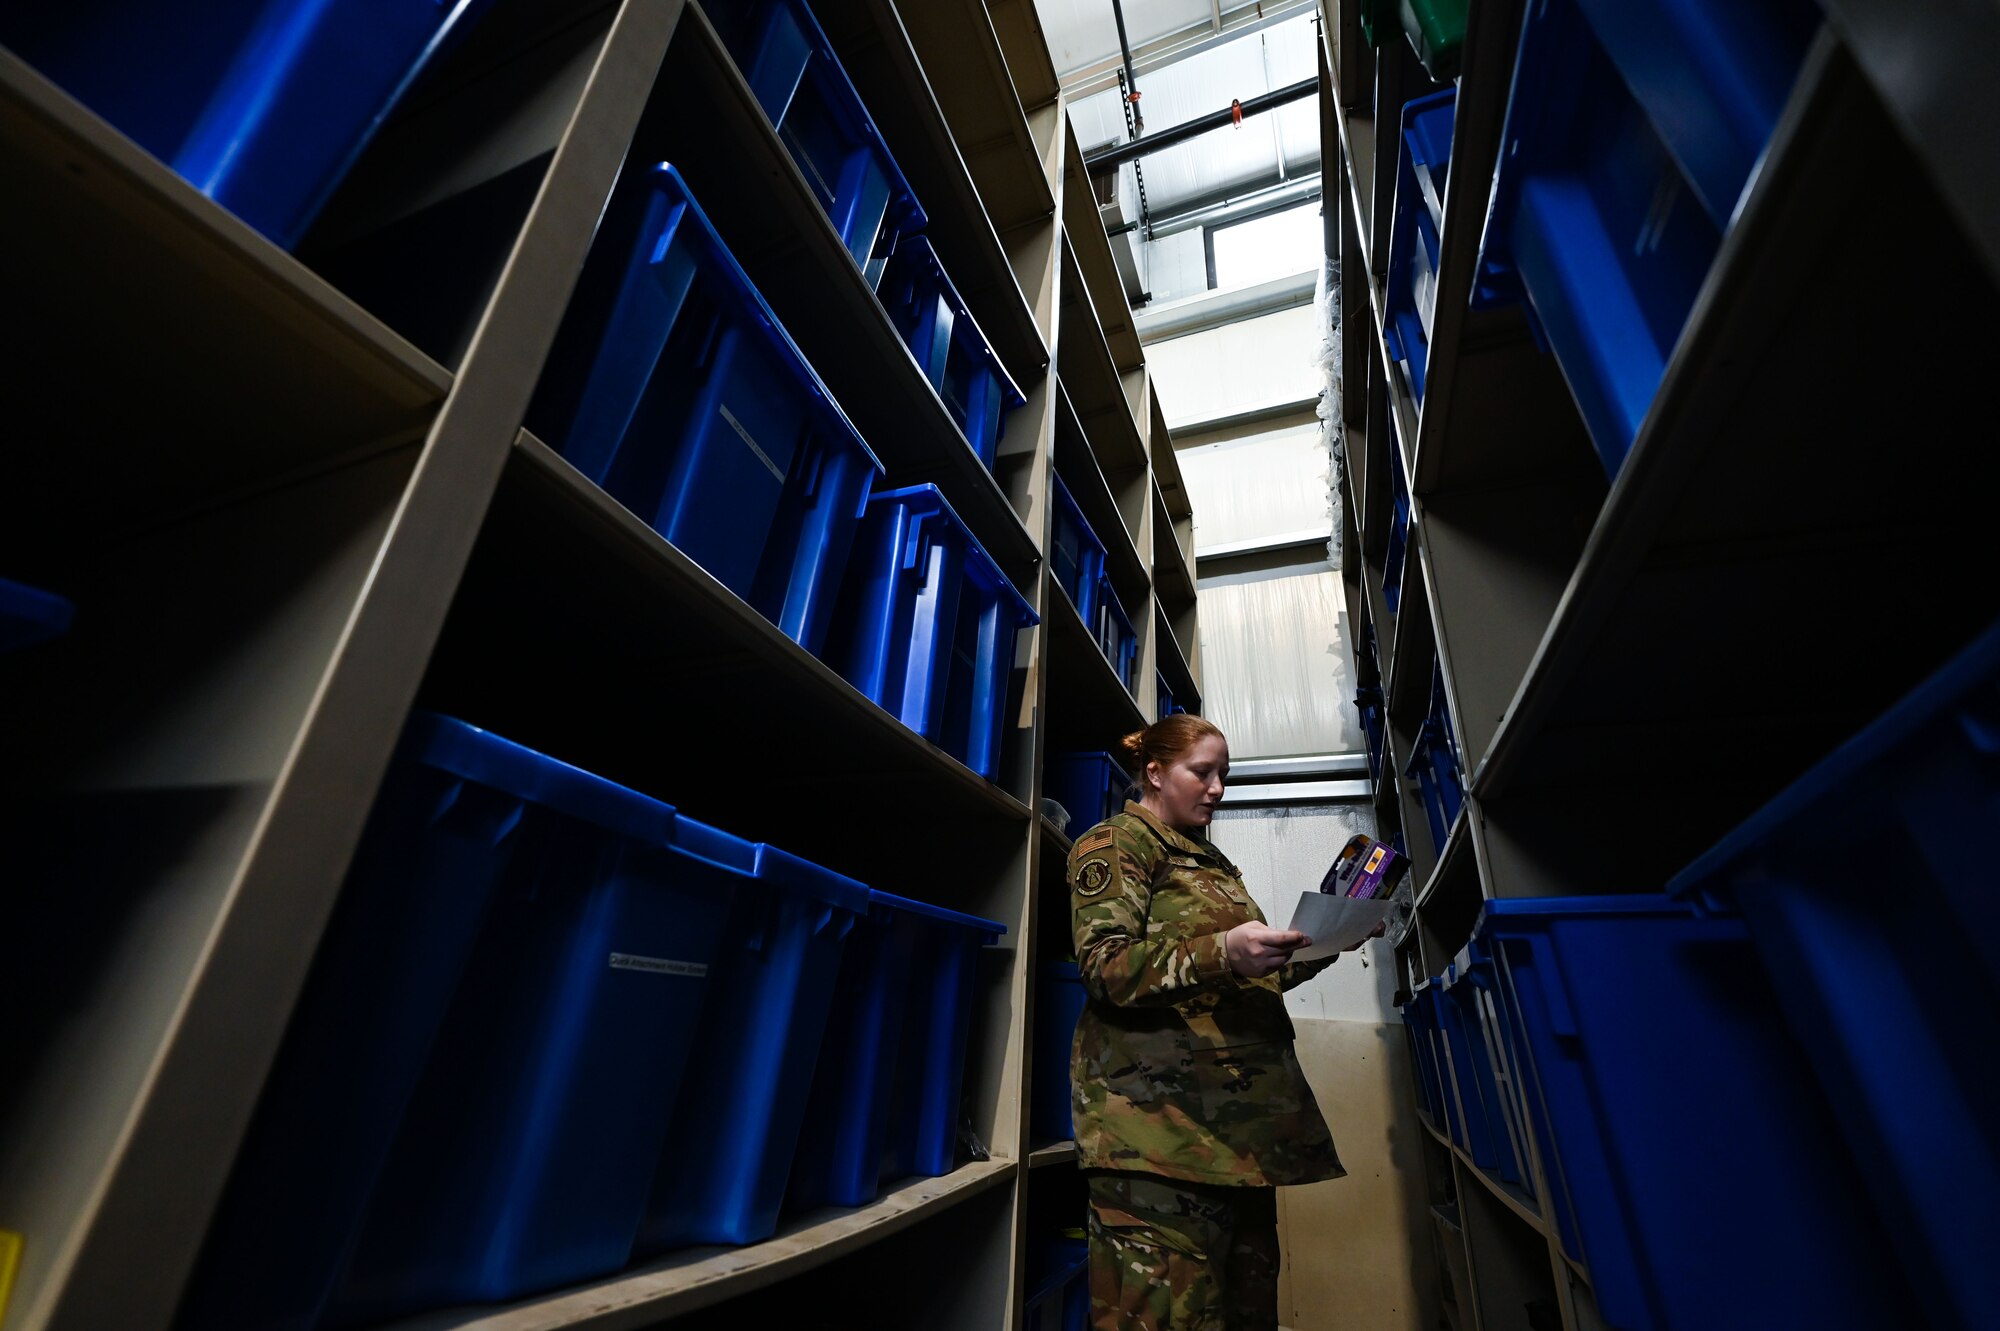 Airman stands in warehouse.